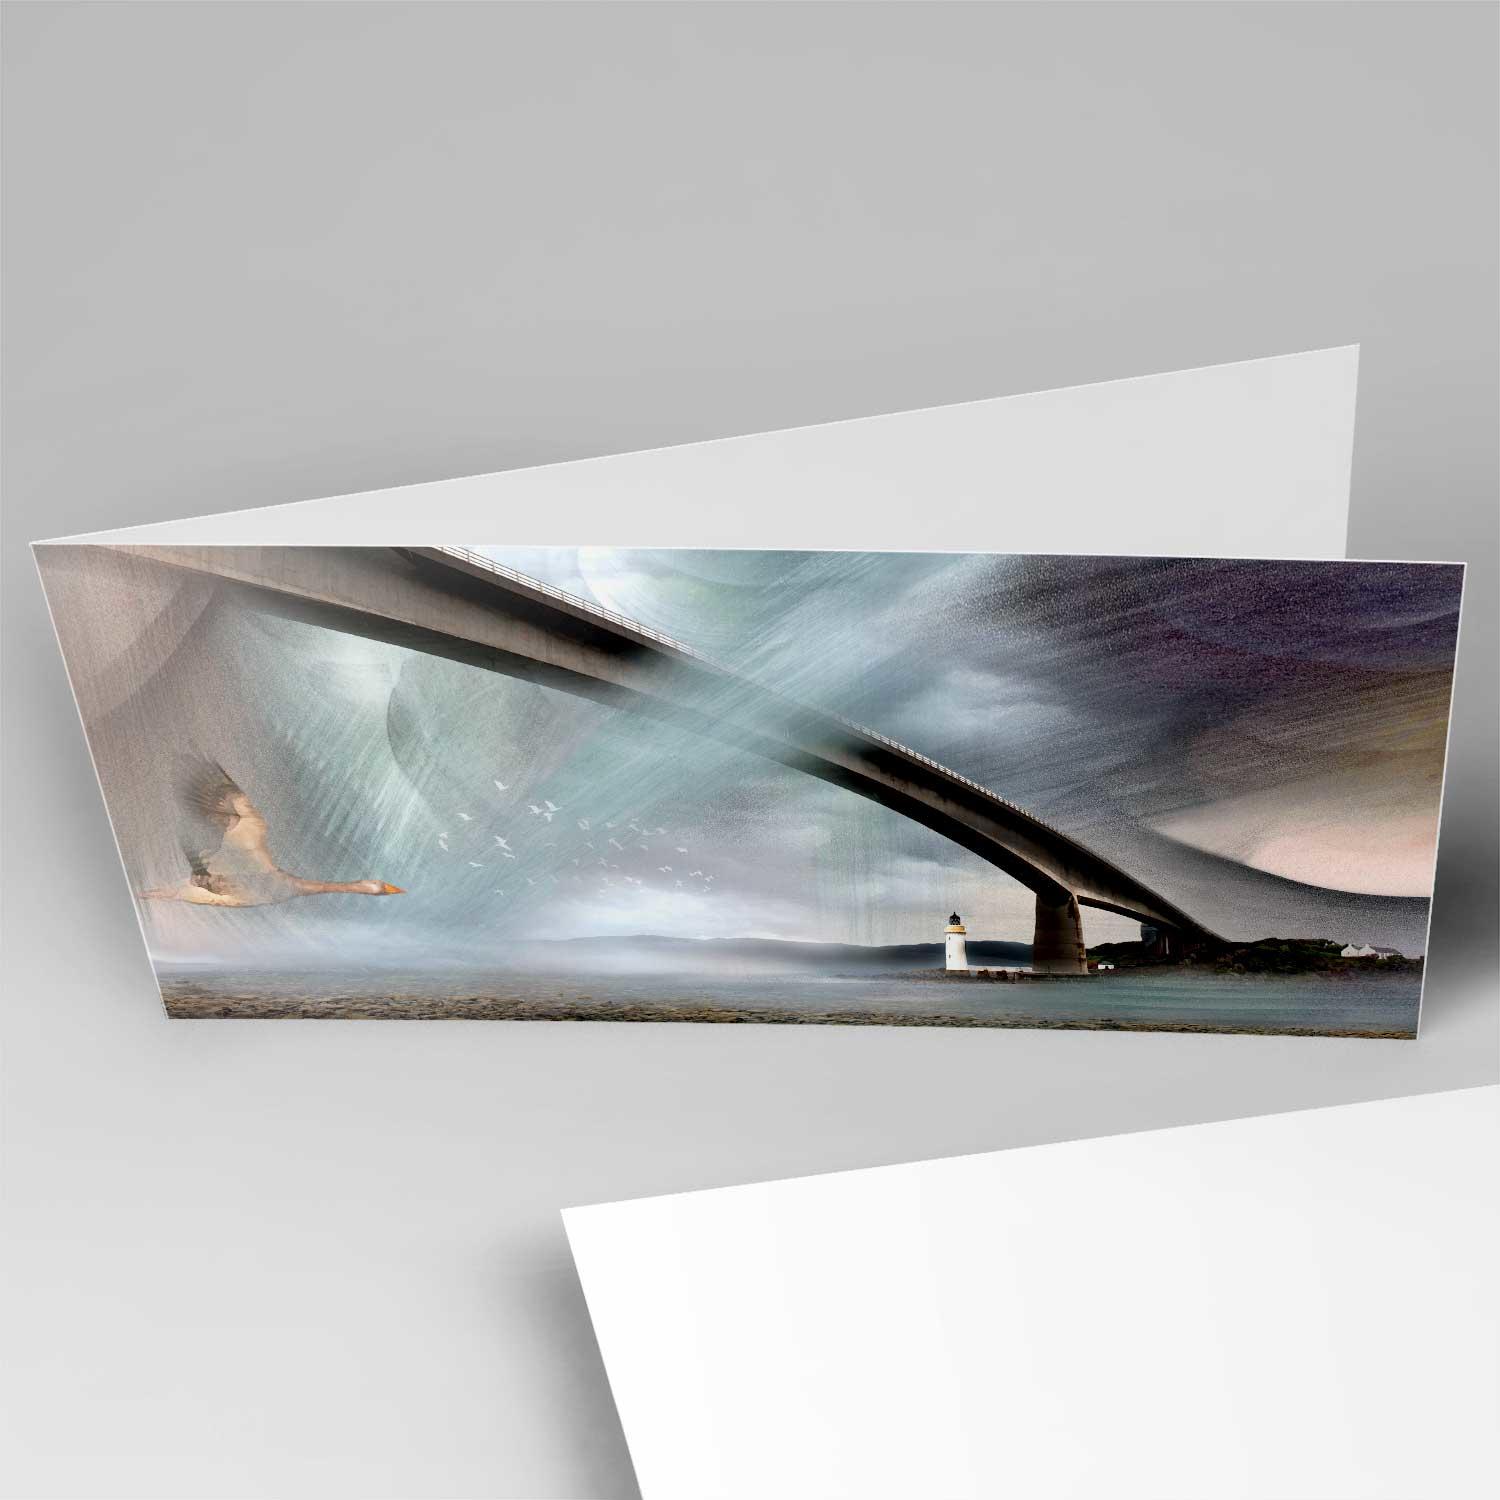 Skye Bridge Greeting Card from an original painting by artist Esther Cohen